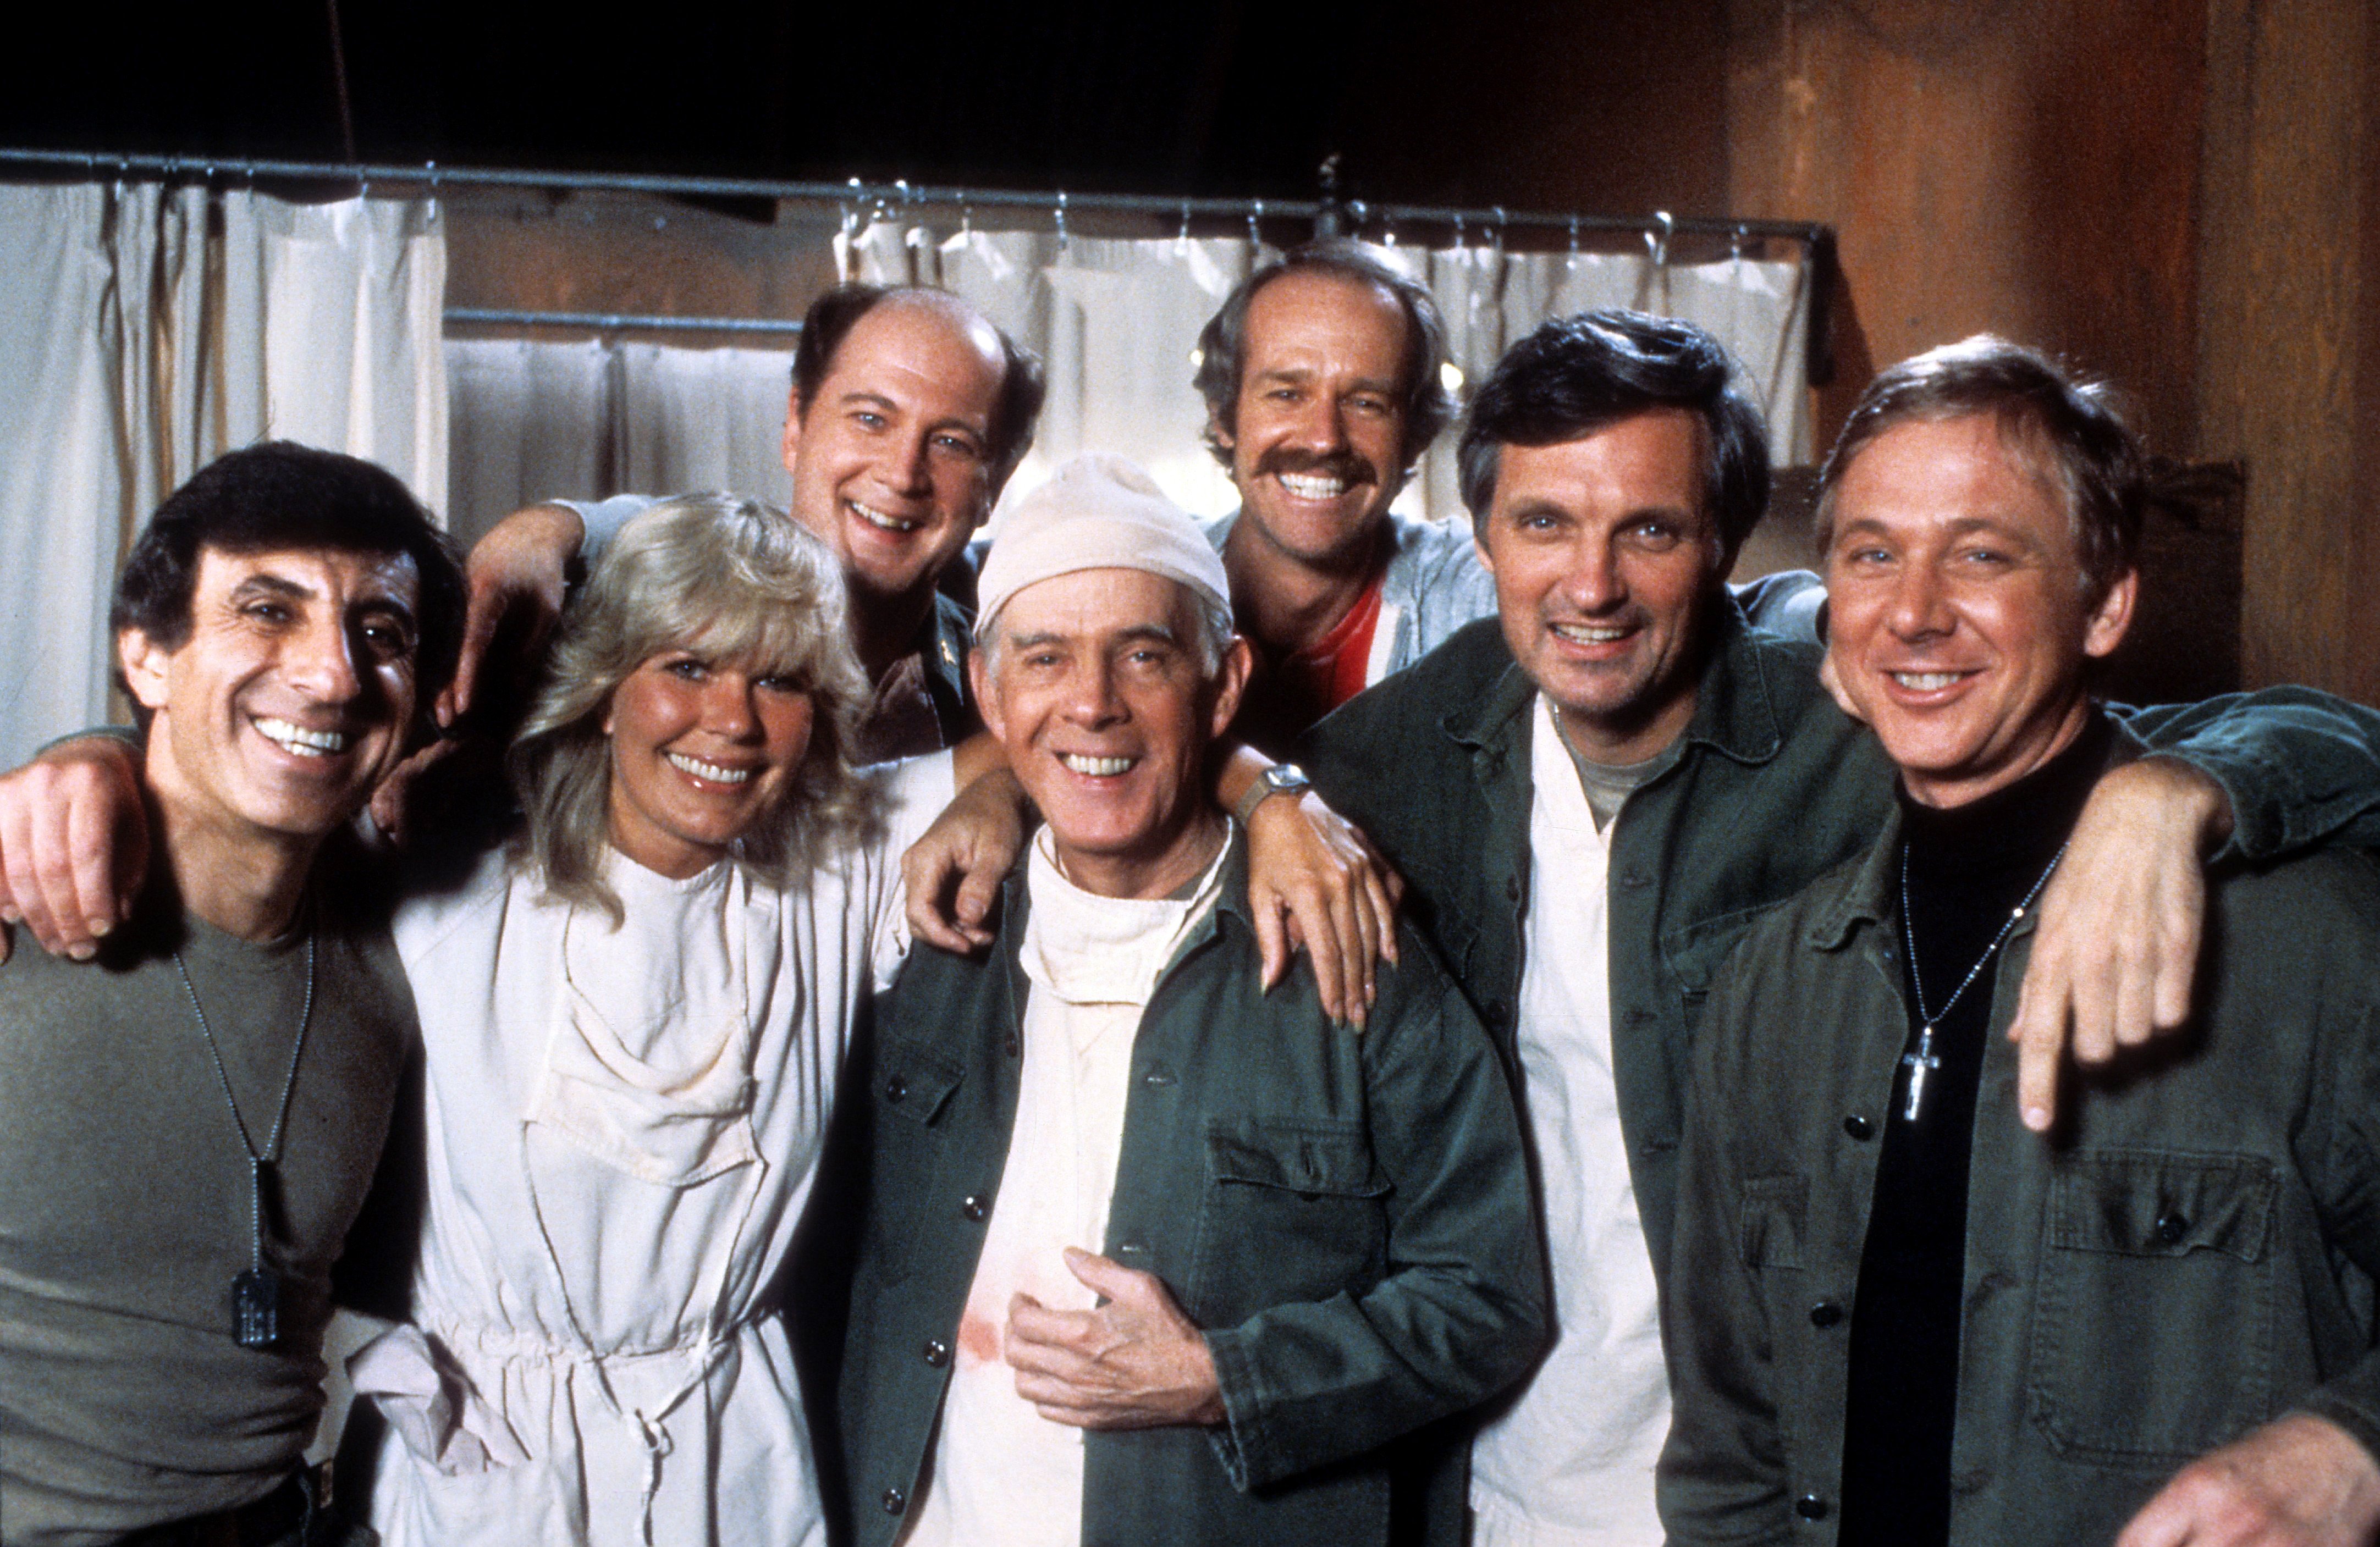 Jamie Farr, Loretta Swit, David Ogden Stiers, Harry Morgan, Mike Farrell, Alan Alda, and William Christopher in a portrait for the comedy series "M*A*S*H" in 1978. | Source: Getty Images